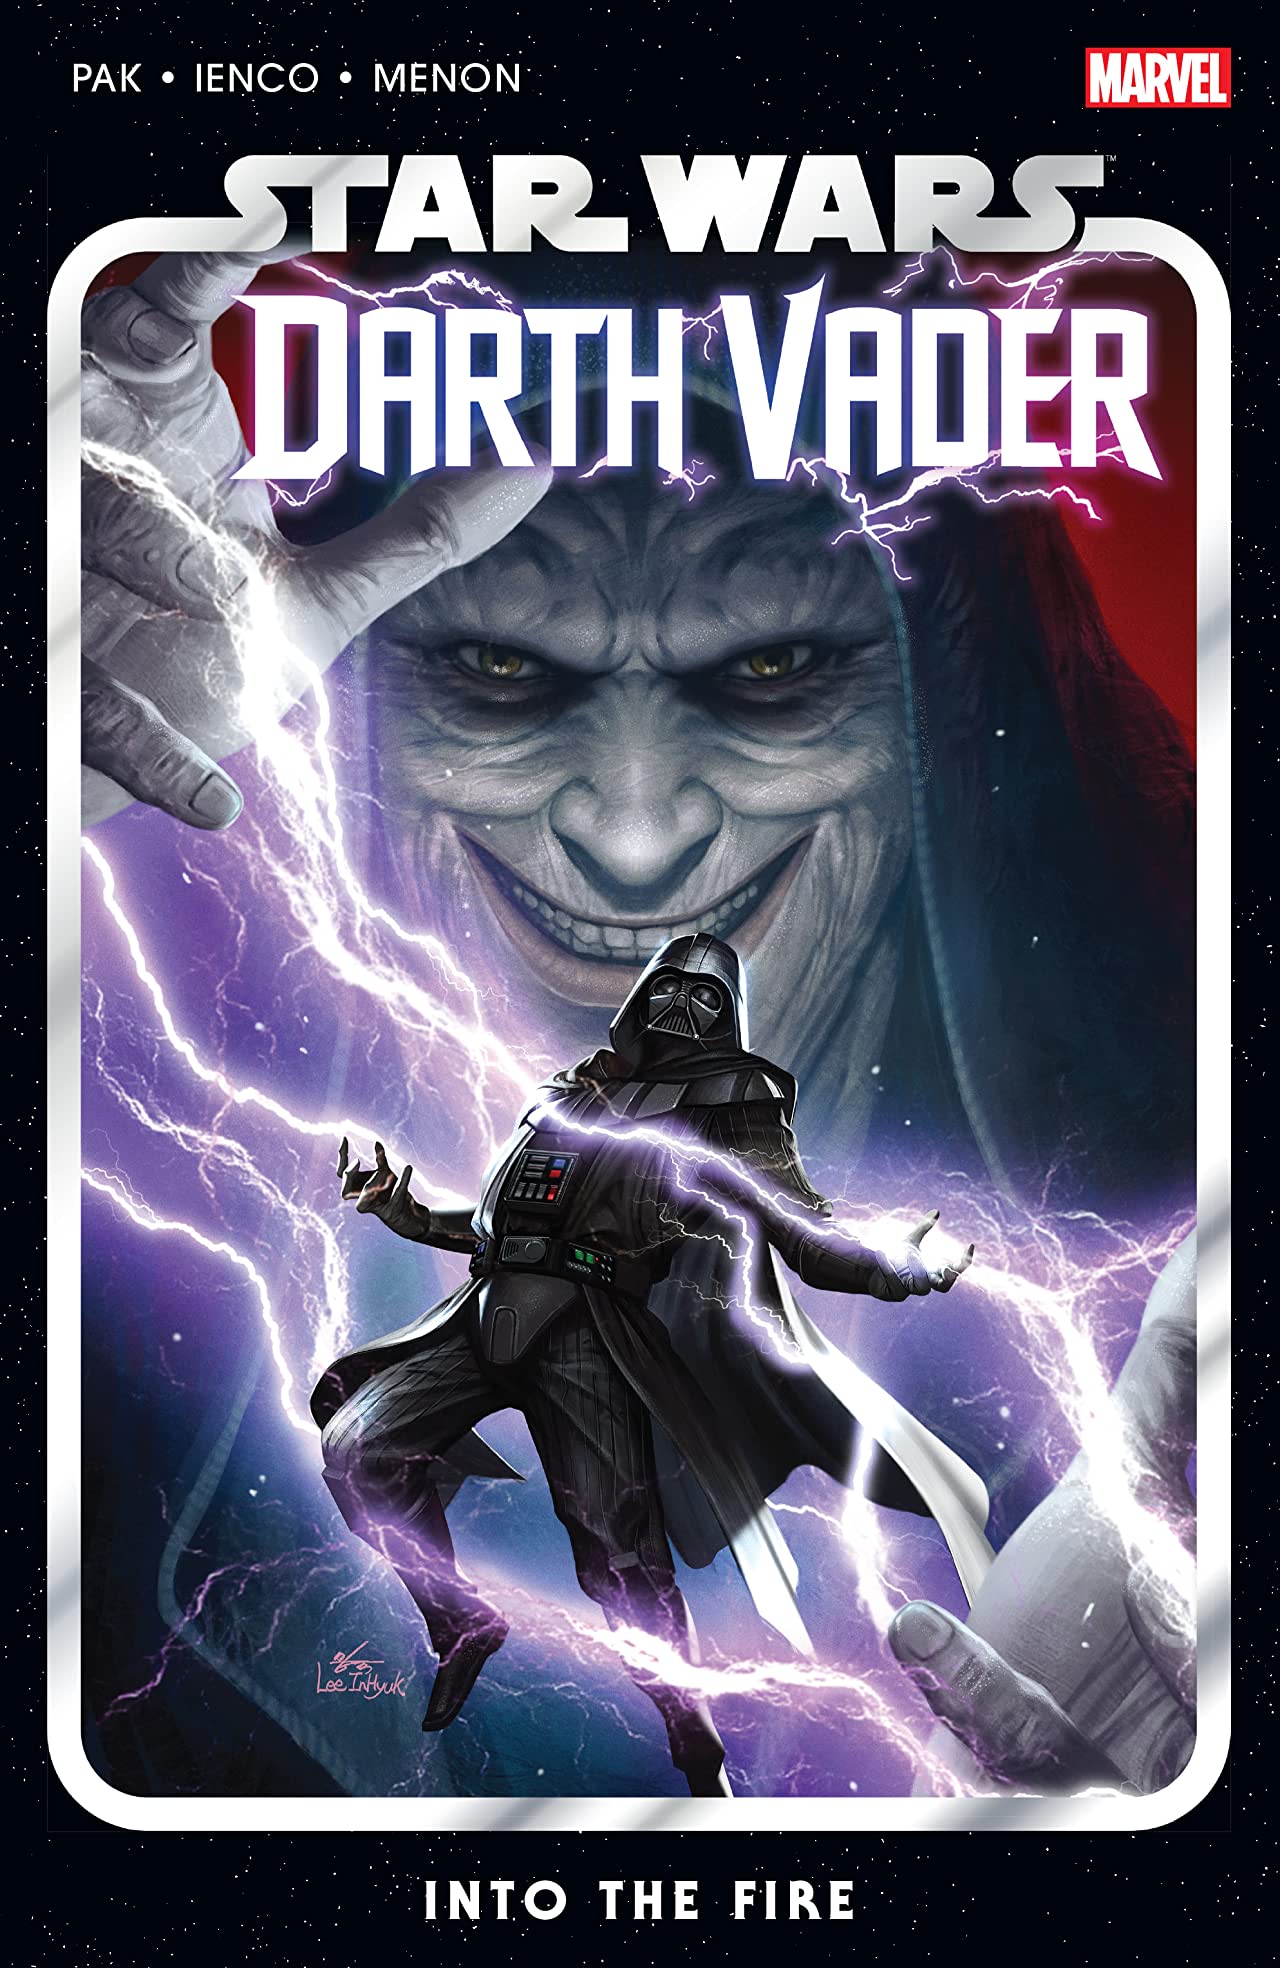 Star Wars: Darth Vader, Vol. 2: Into the Fire by Greg Pak